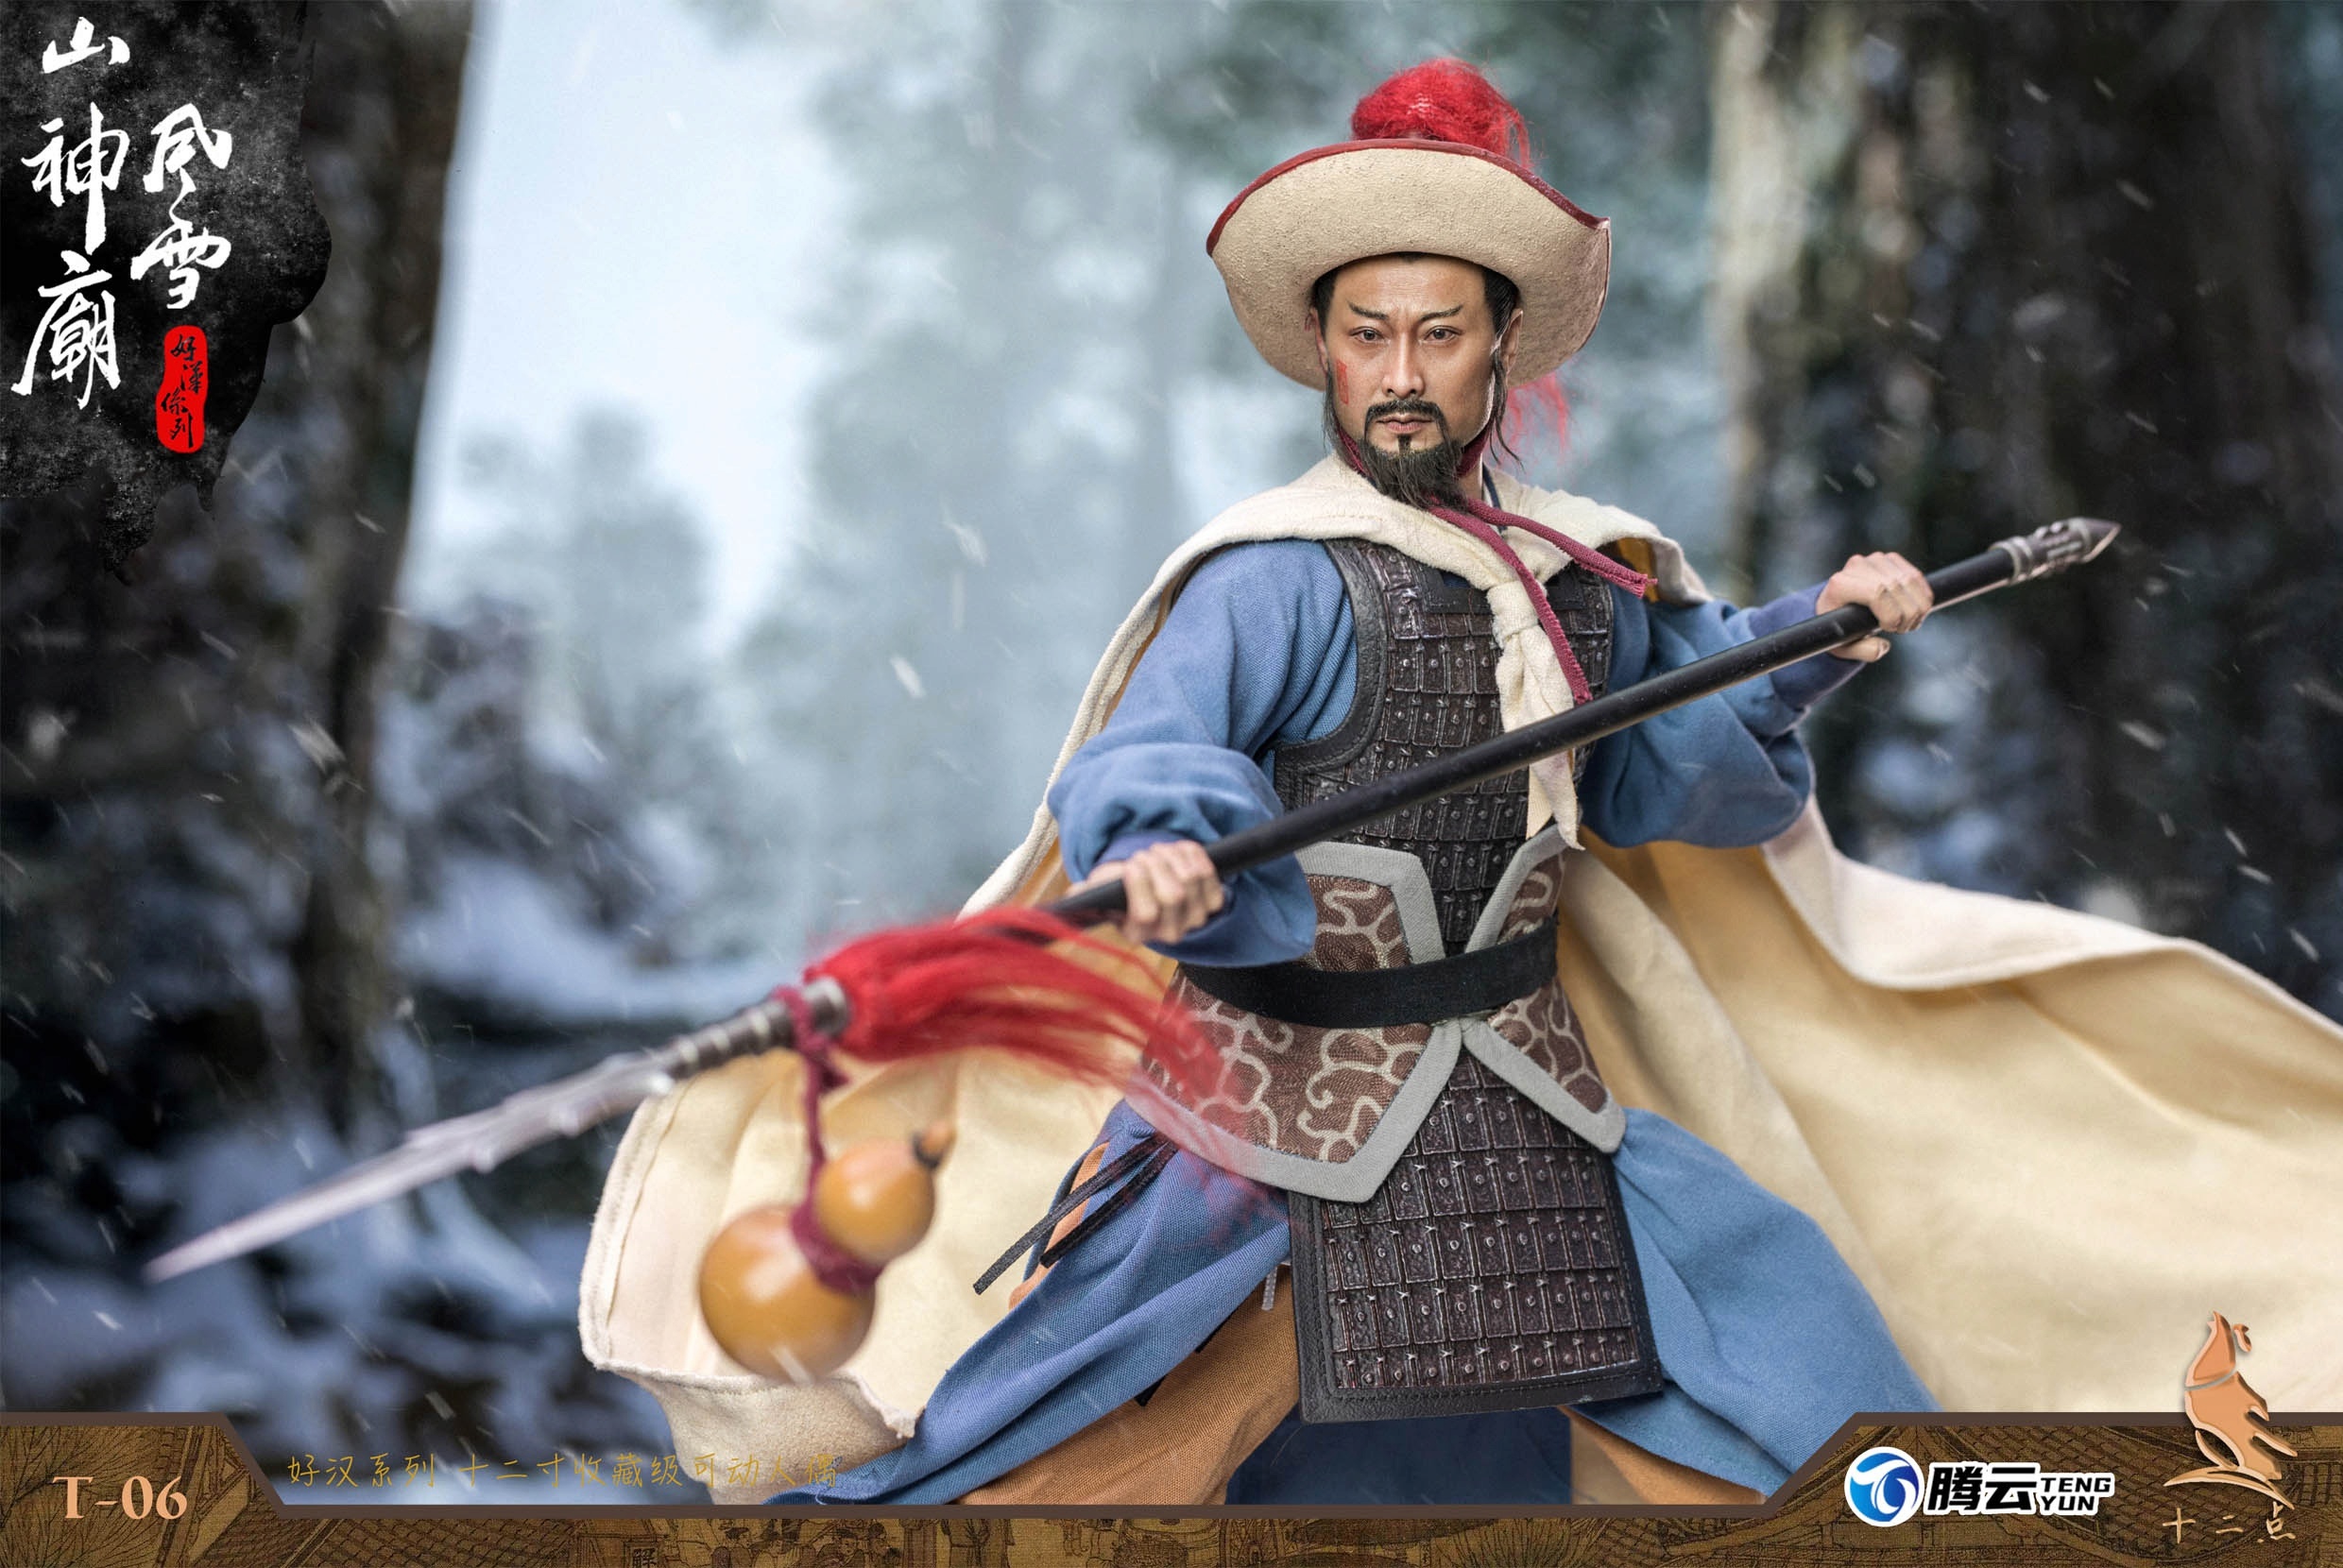 NEW PRODUCT: Twelve - Hero Series - Leopard Head Lin Chong Fengxue Mountain Temple Action Figure (T-05 /T-06) 2431